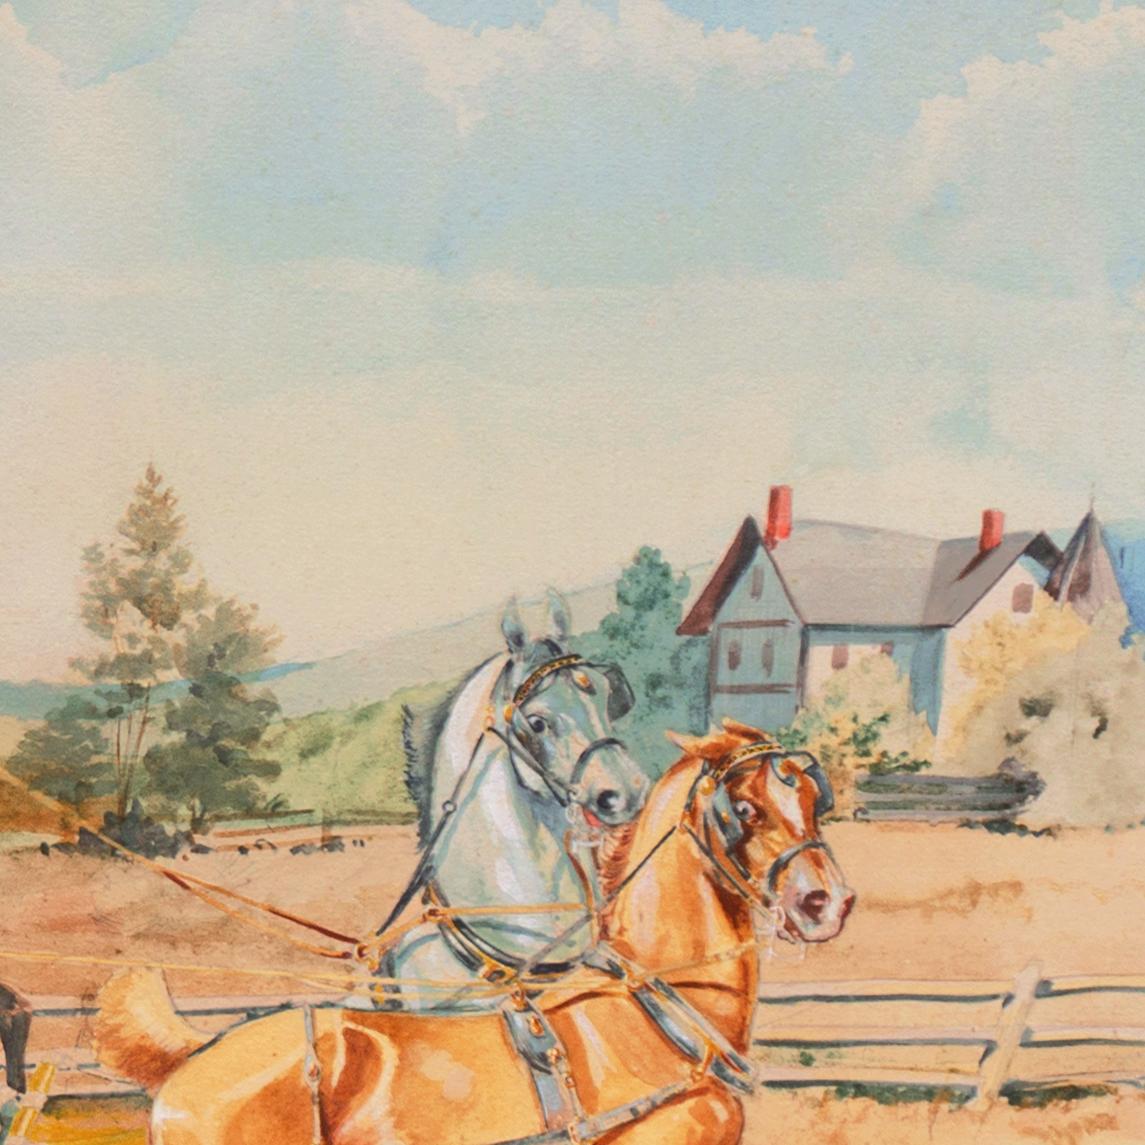 'London to Brighton Coach', Massachusetts, National Academy of Design, Horses For Sale 2